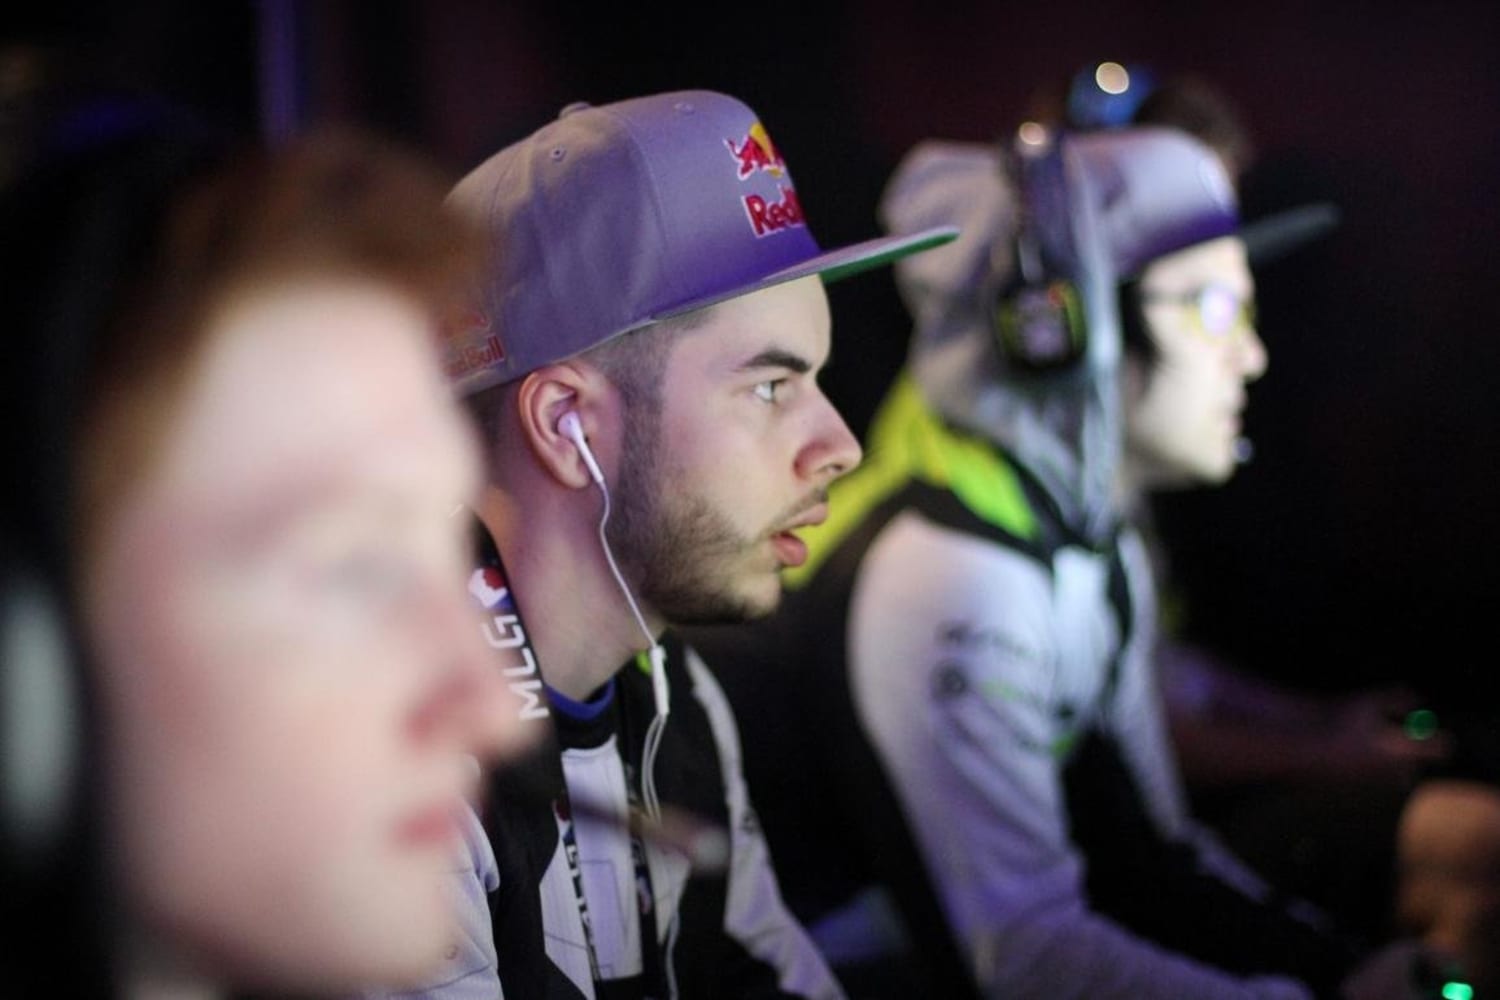 How to watch the Call of Duty Championship 2015